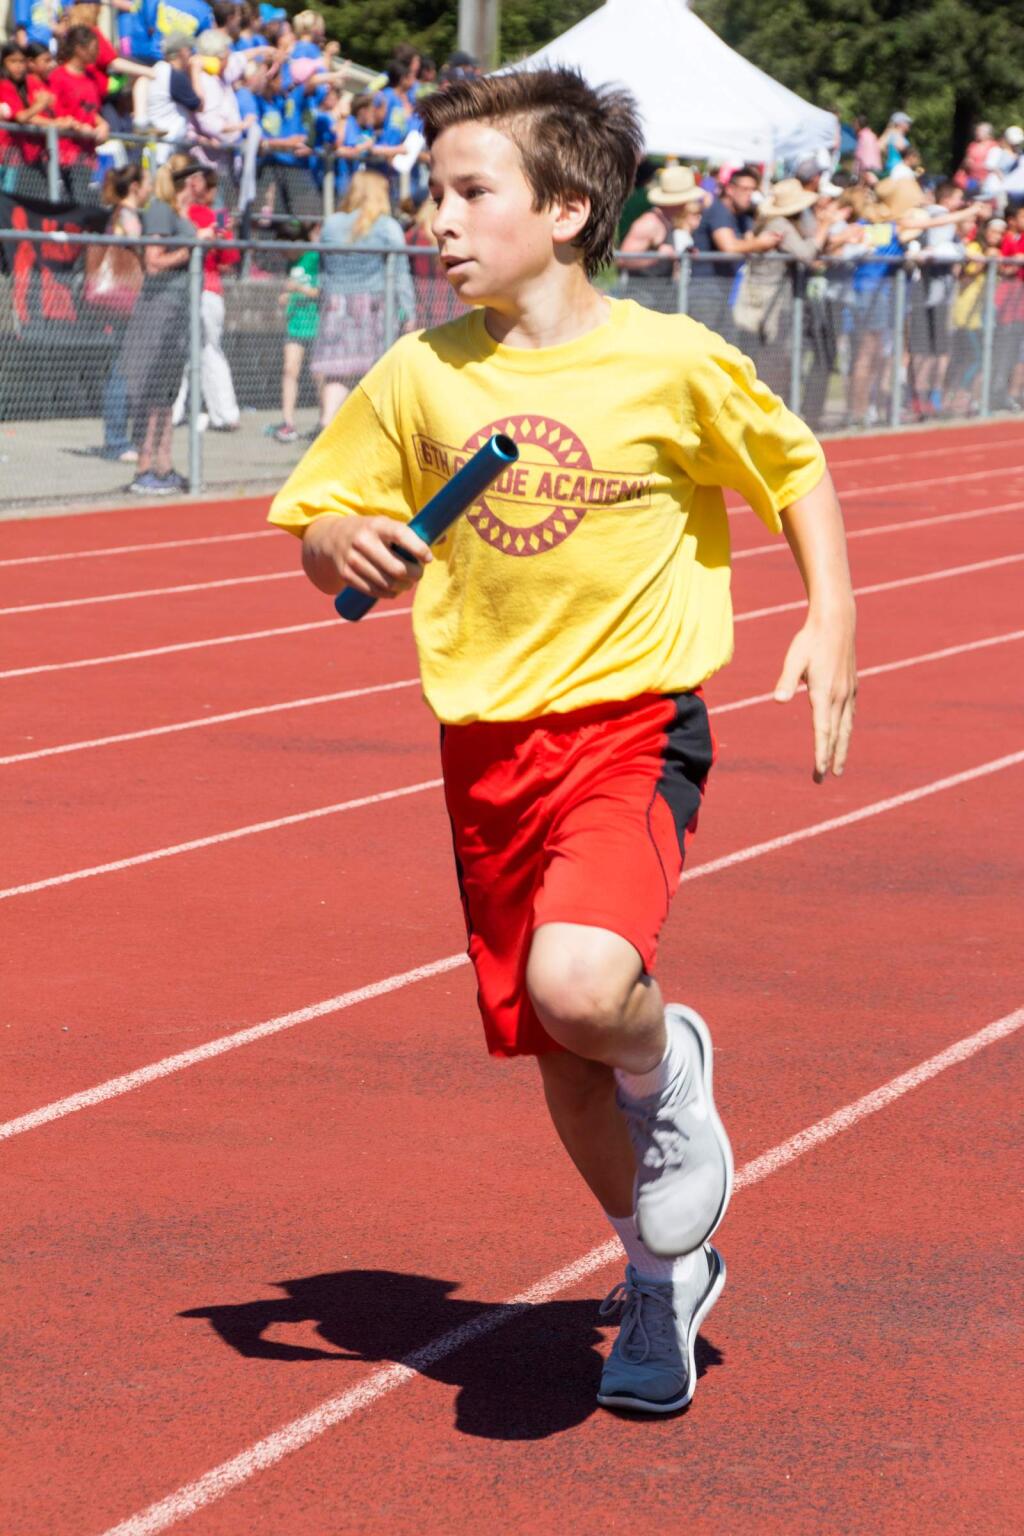 Many schools, including Penngrove Elementary, compete against each other in various track and field activities, such as 400 and 800 meter relays, during the large school West Side Relays at Petaluma High School on Tuesday, May 17, 2016. (ASHLEY COLLINGWOOD/FOR THE ARGUS-COURIER)